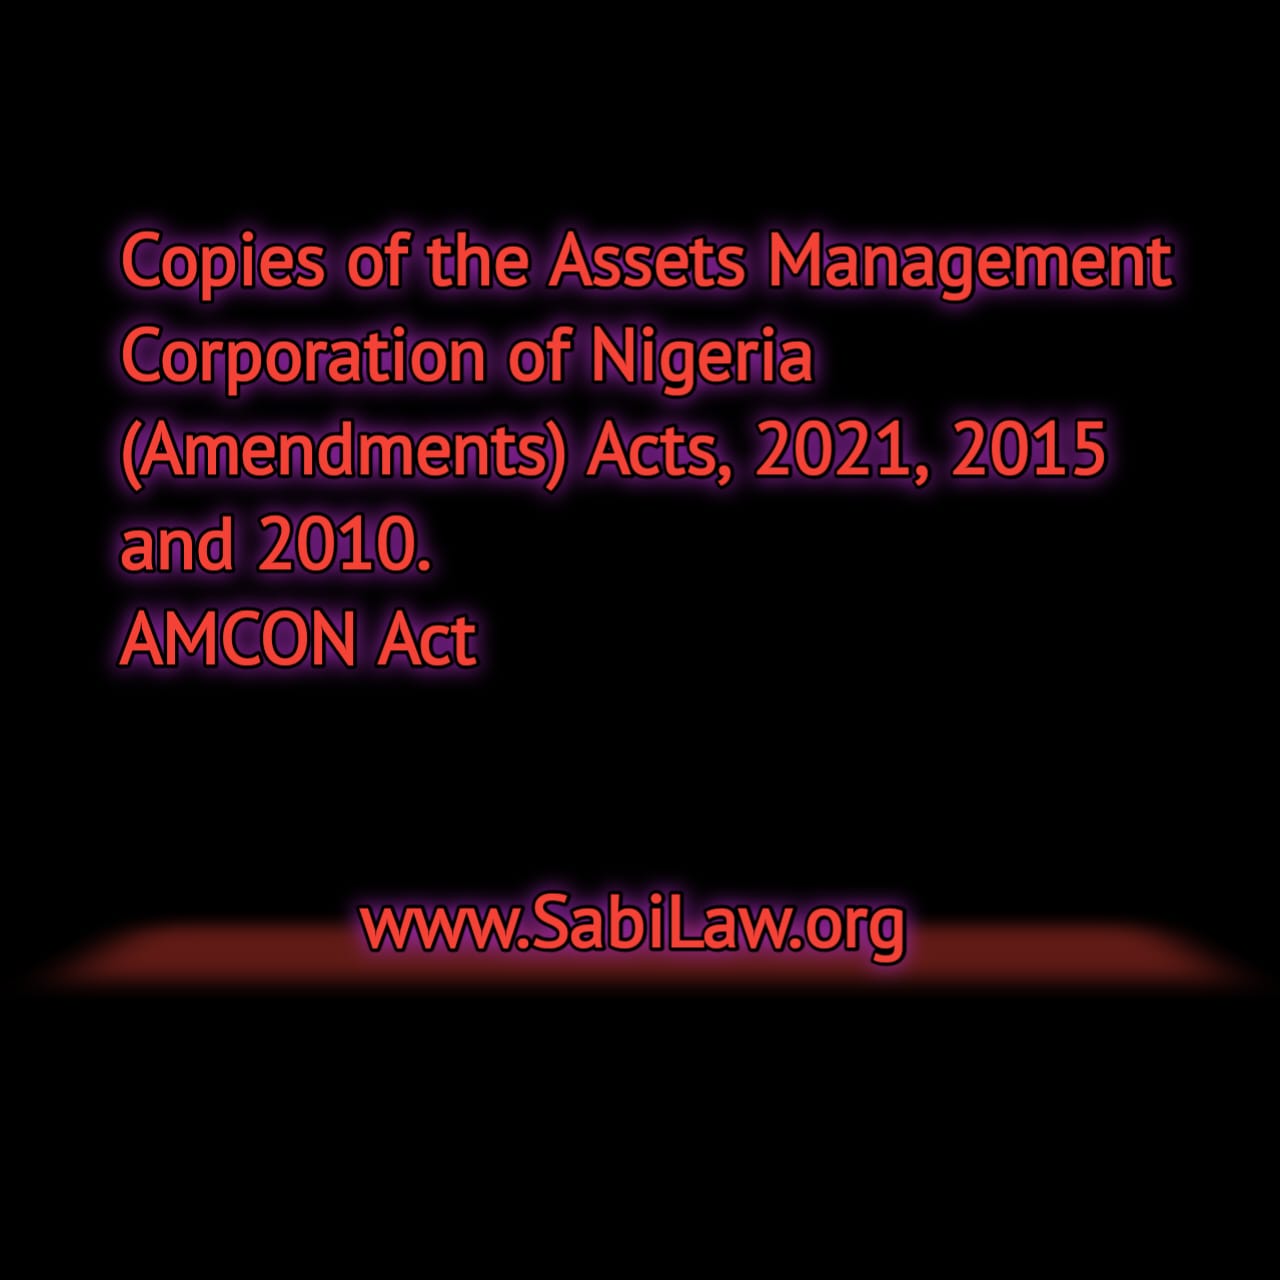 Copies of the Assets Management Corporation of Nigeria (Amendments) Acts, 2021, 2015 and 2010. AMCON Act.